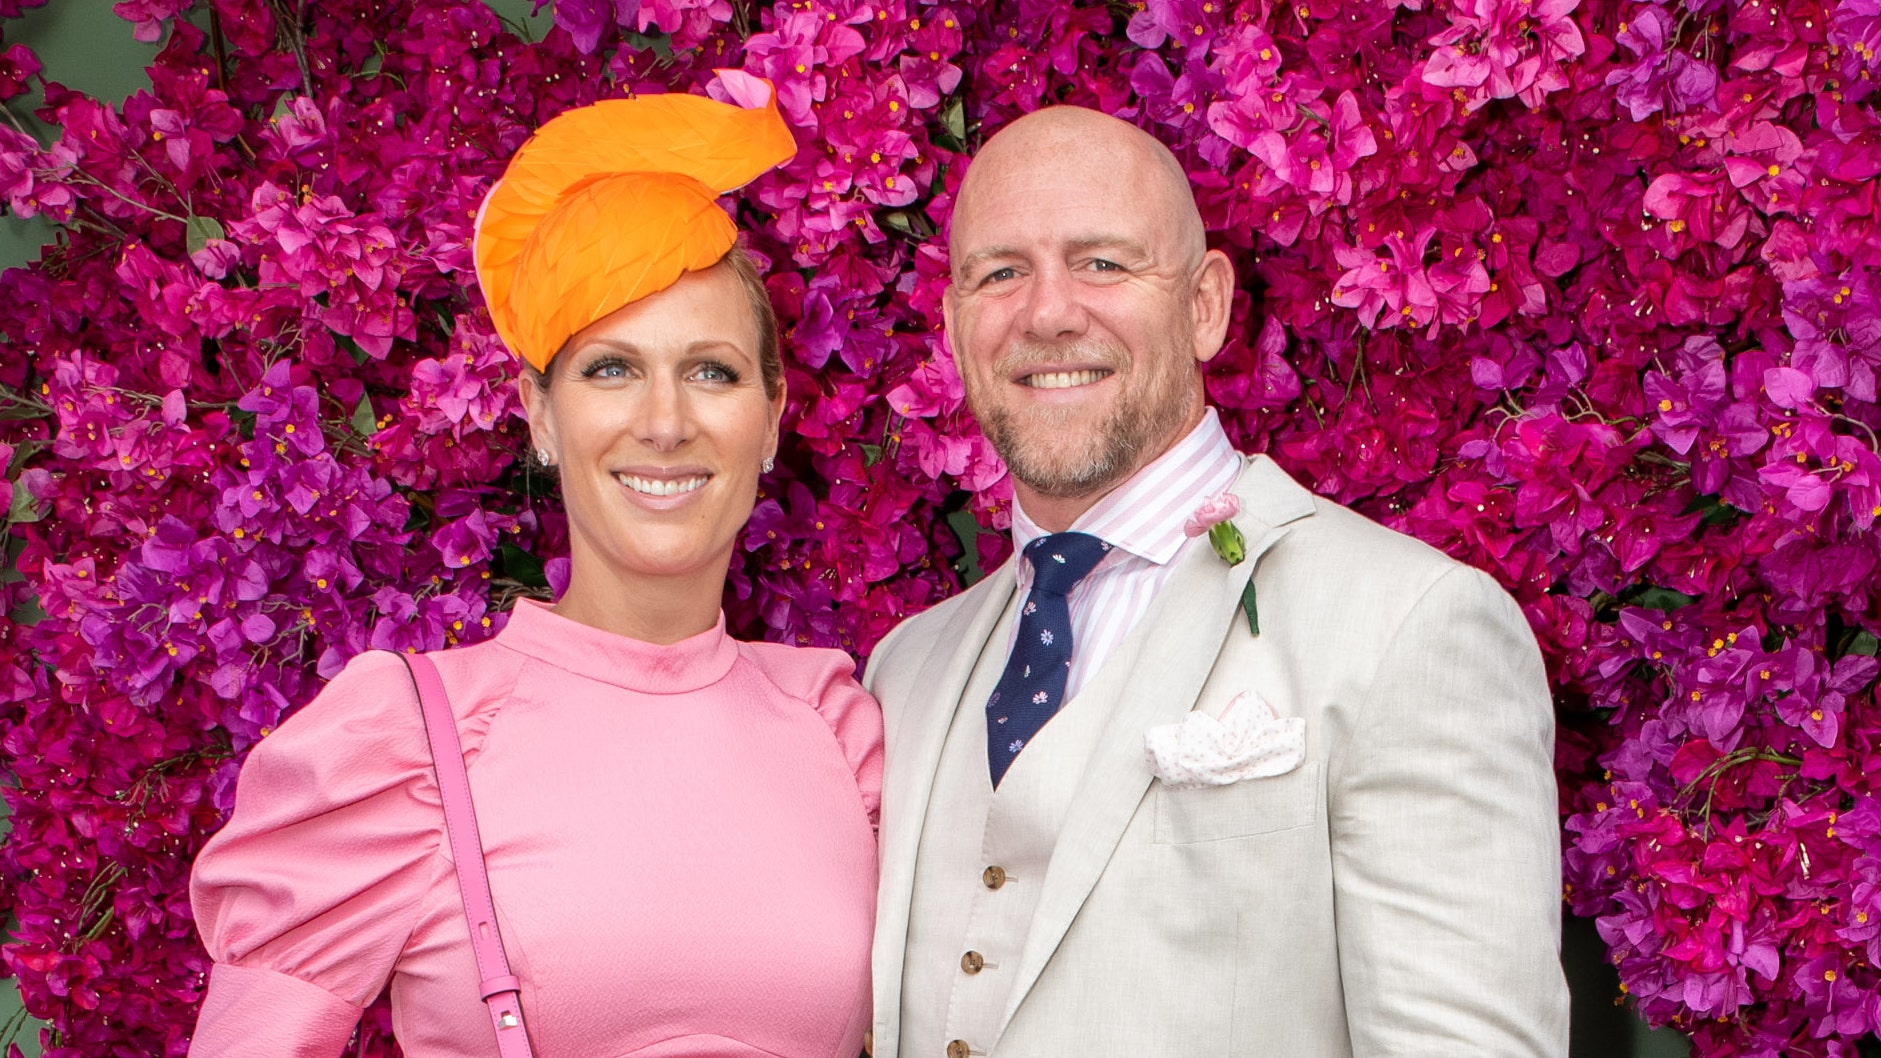 Queen Elizabeth’s grandson-in-law Mike Tindall says wife Zara’s bathroom birth ‘wasn’t what we were expecting’